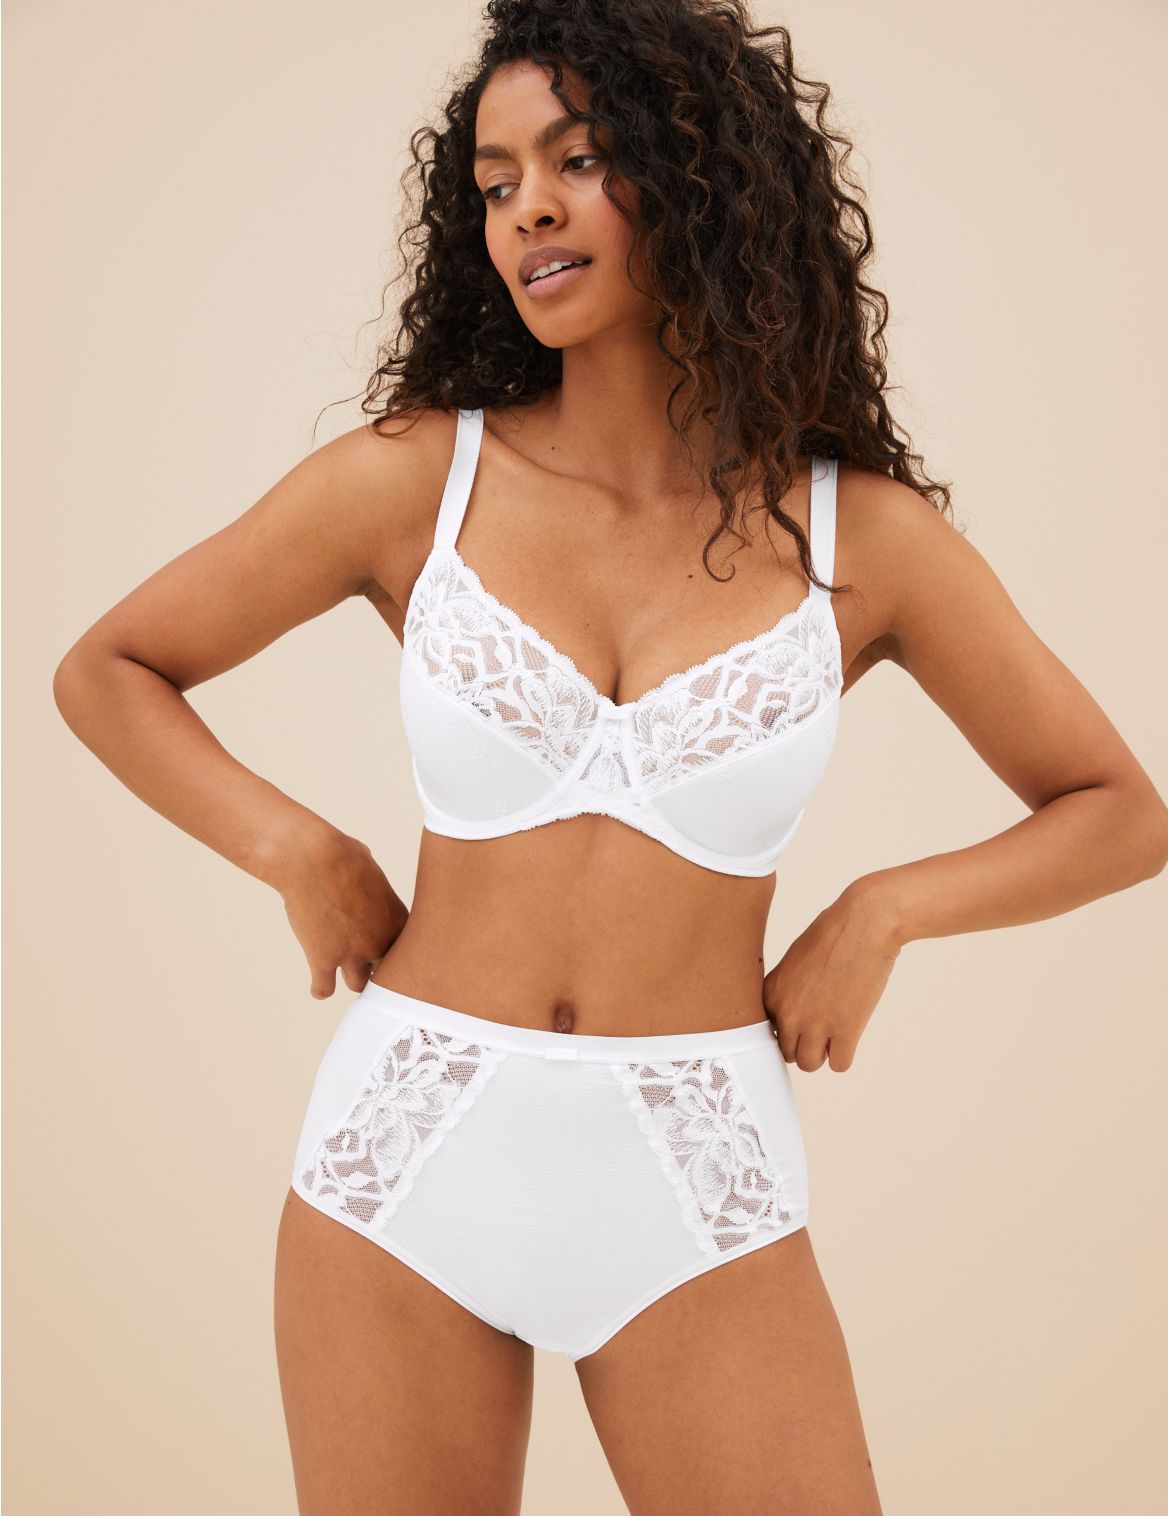 Wild Blooms Lace High Waisted Full Briefs white